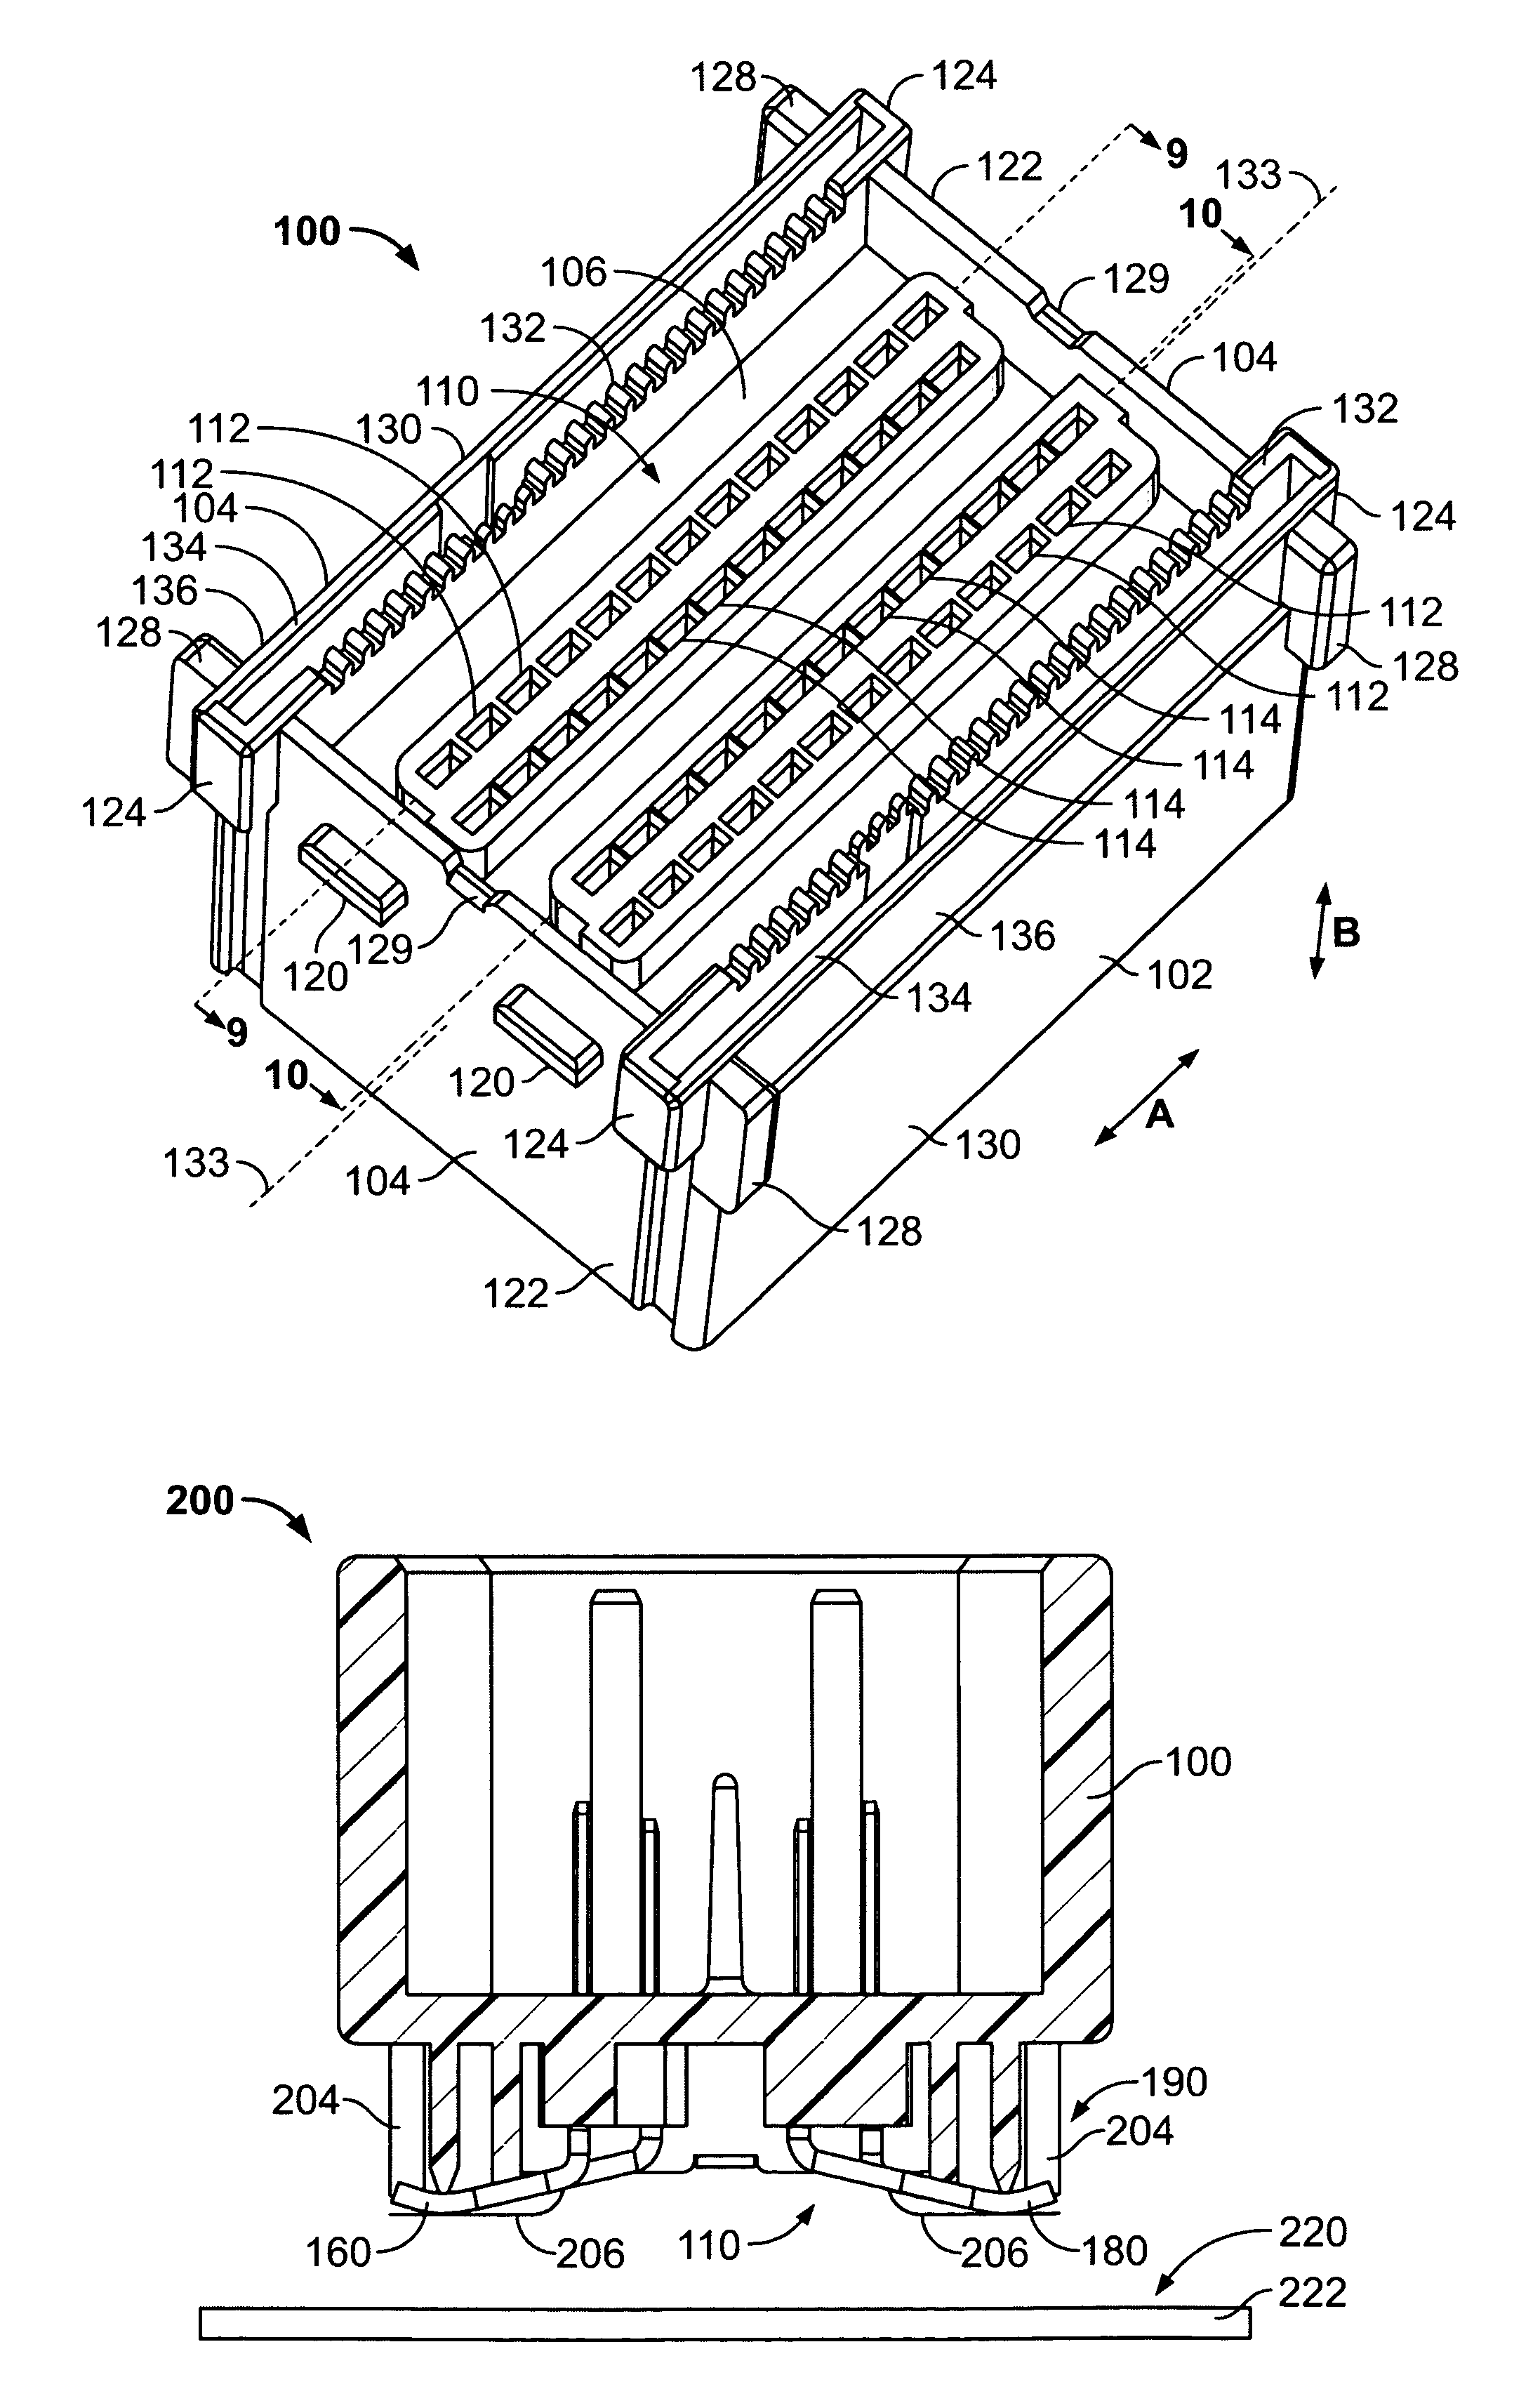 Surface mount header assembly having a planar alignment surface